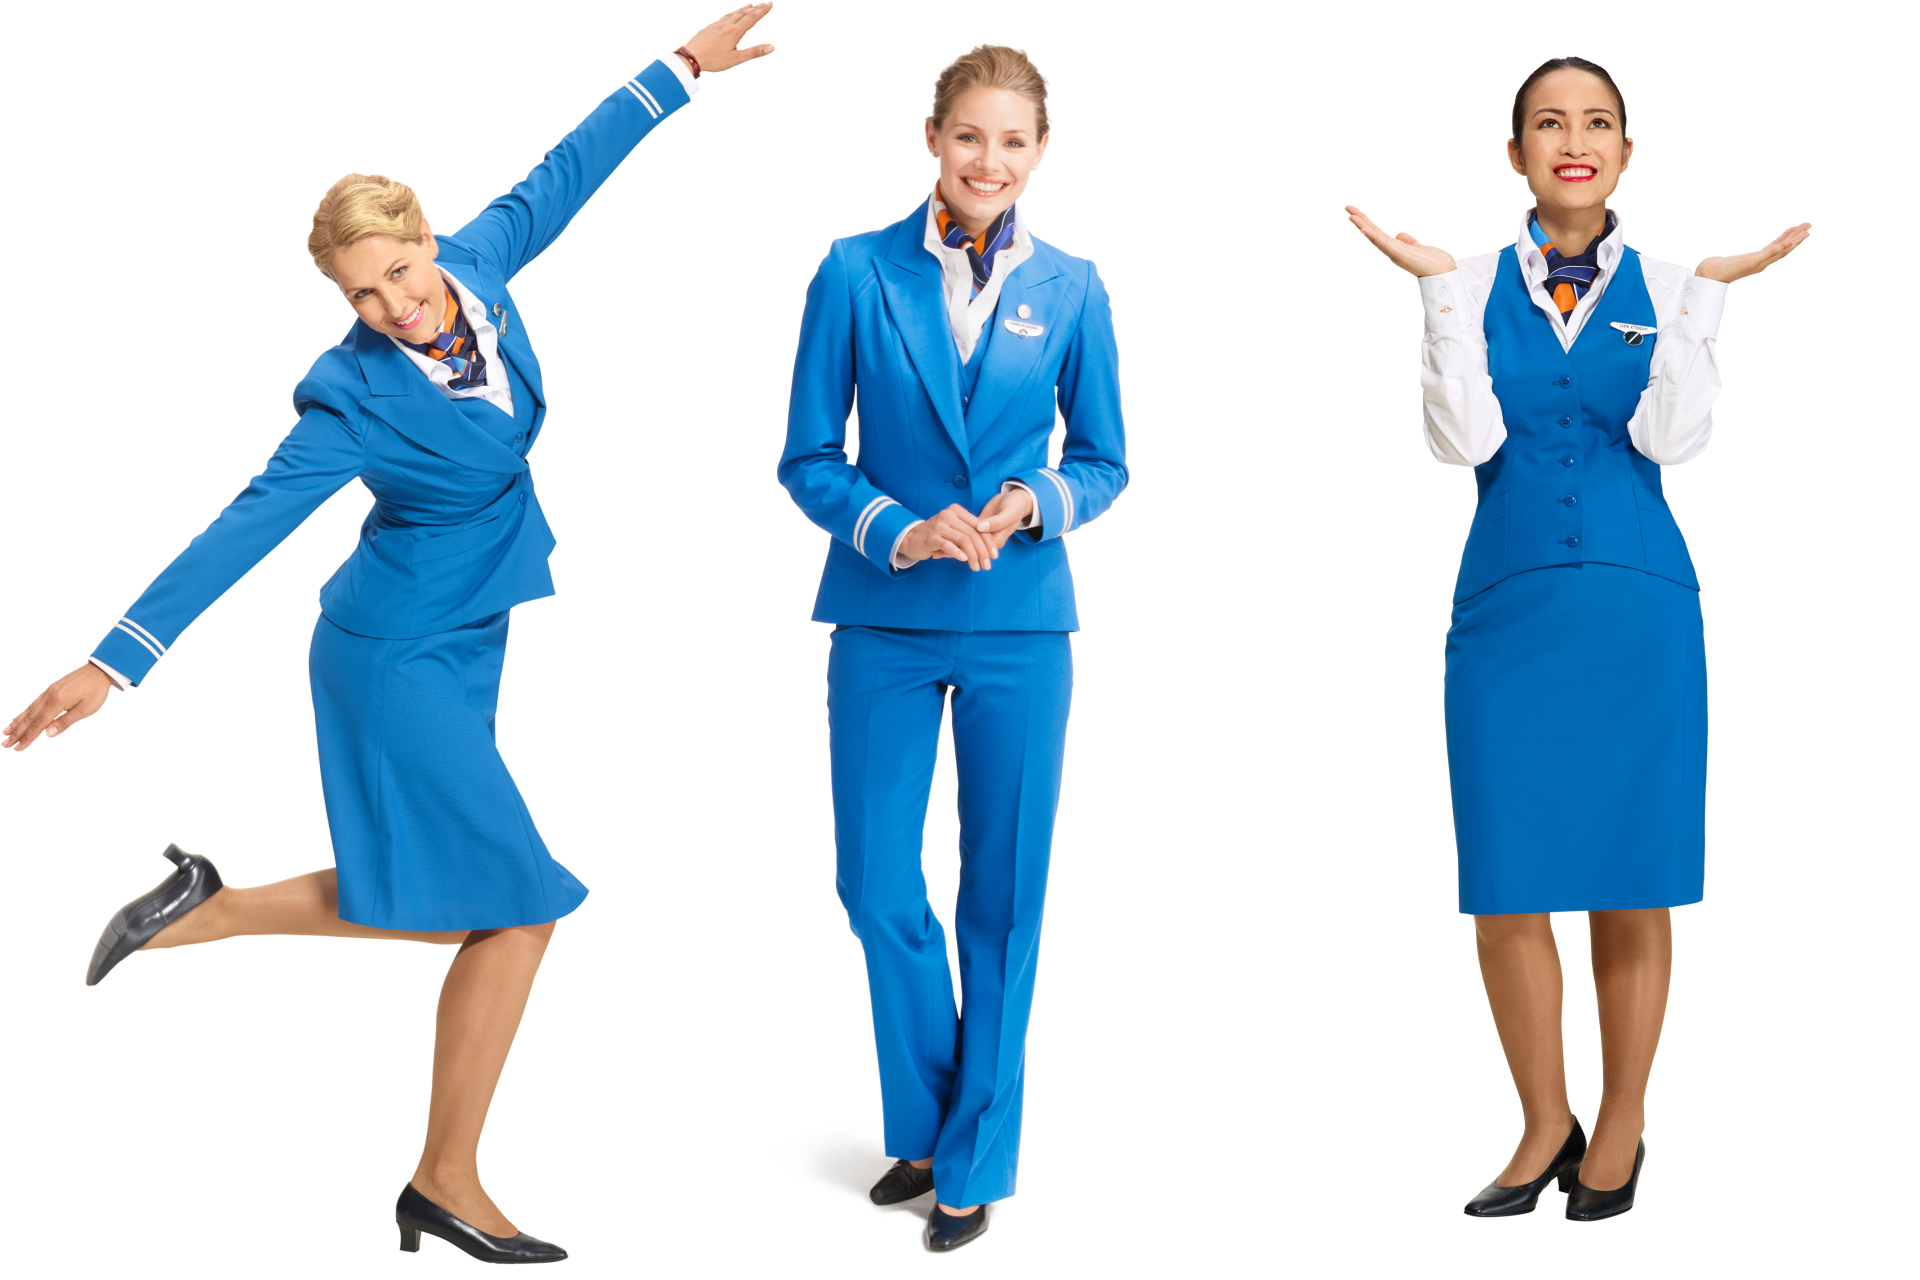 & Outs of the KLM Uniform - KLM